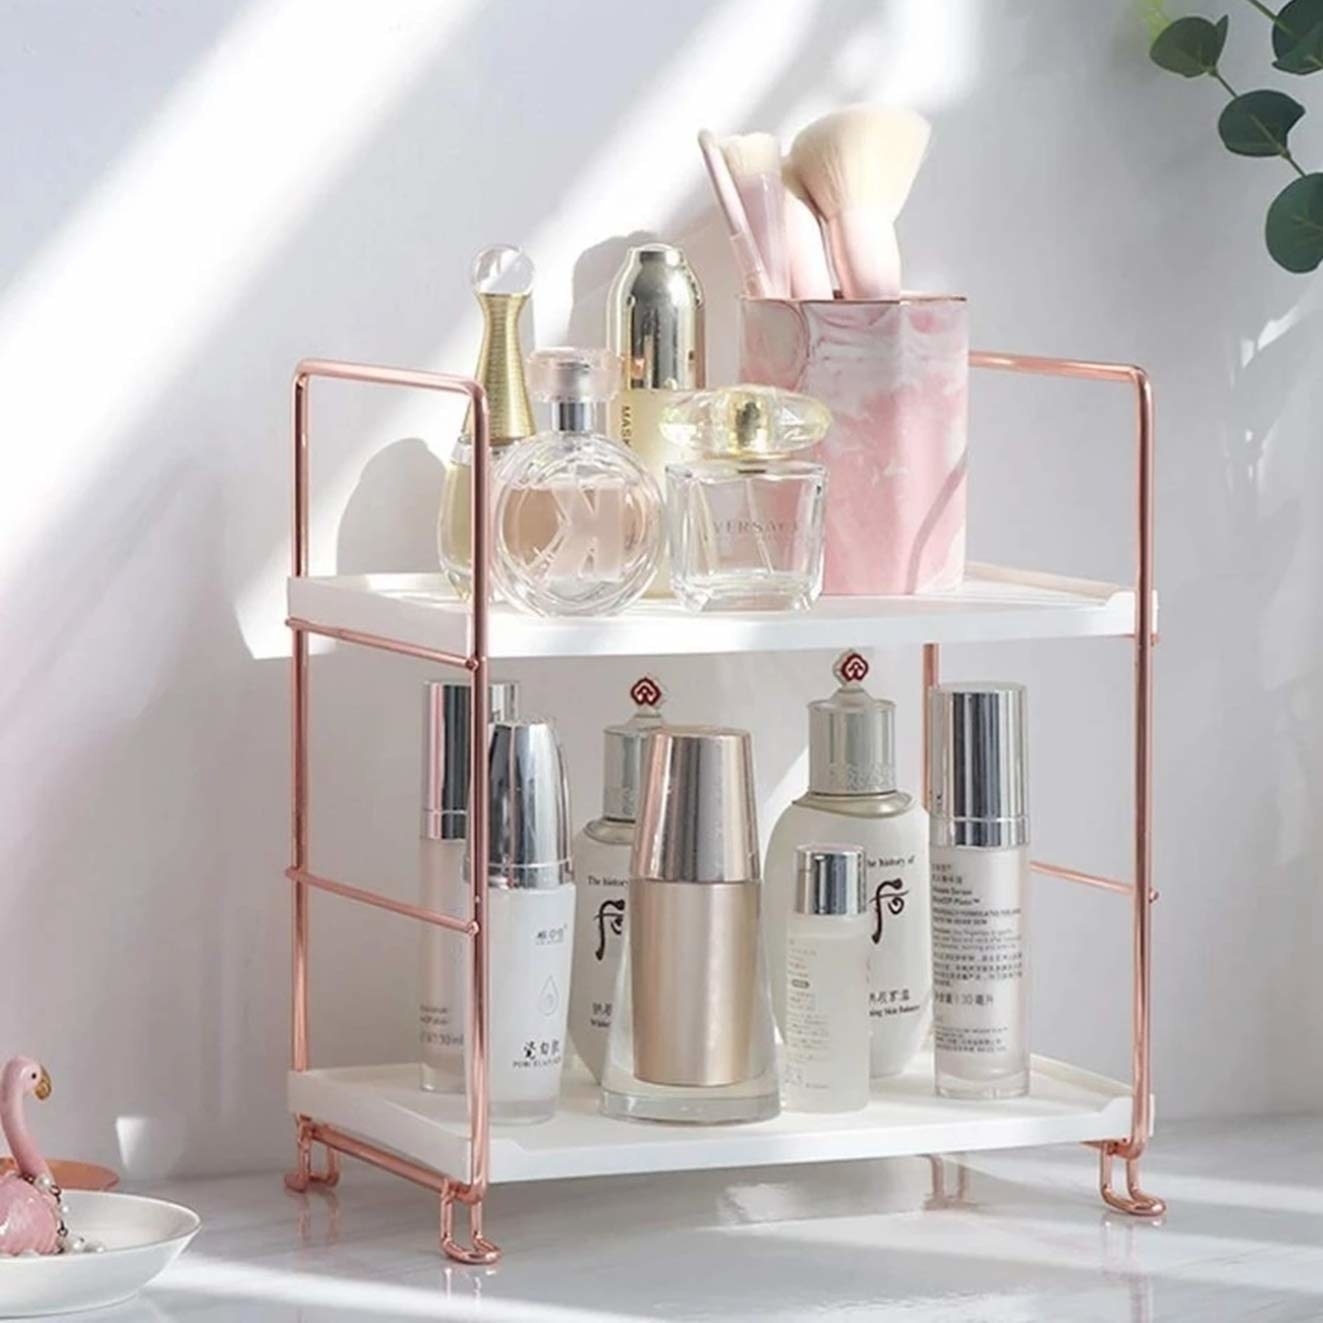 The two-tier rack with a white base and rose gold sides.